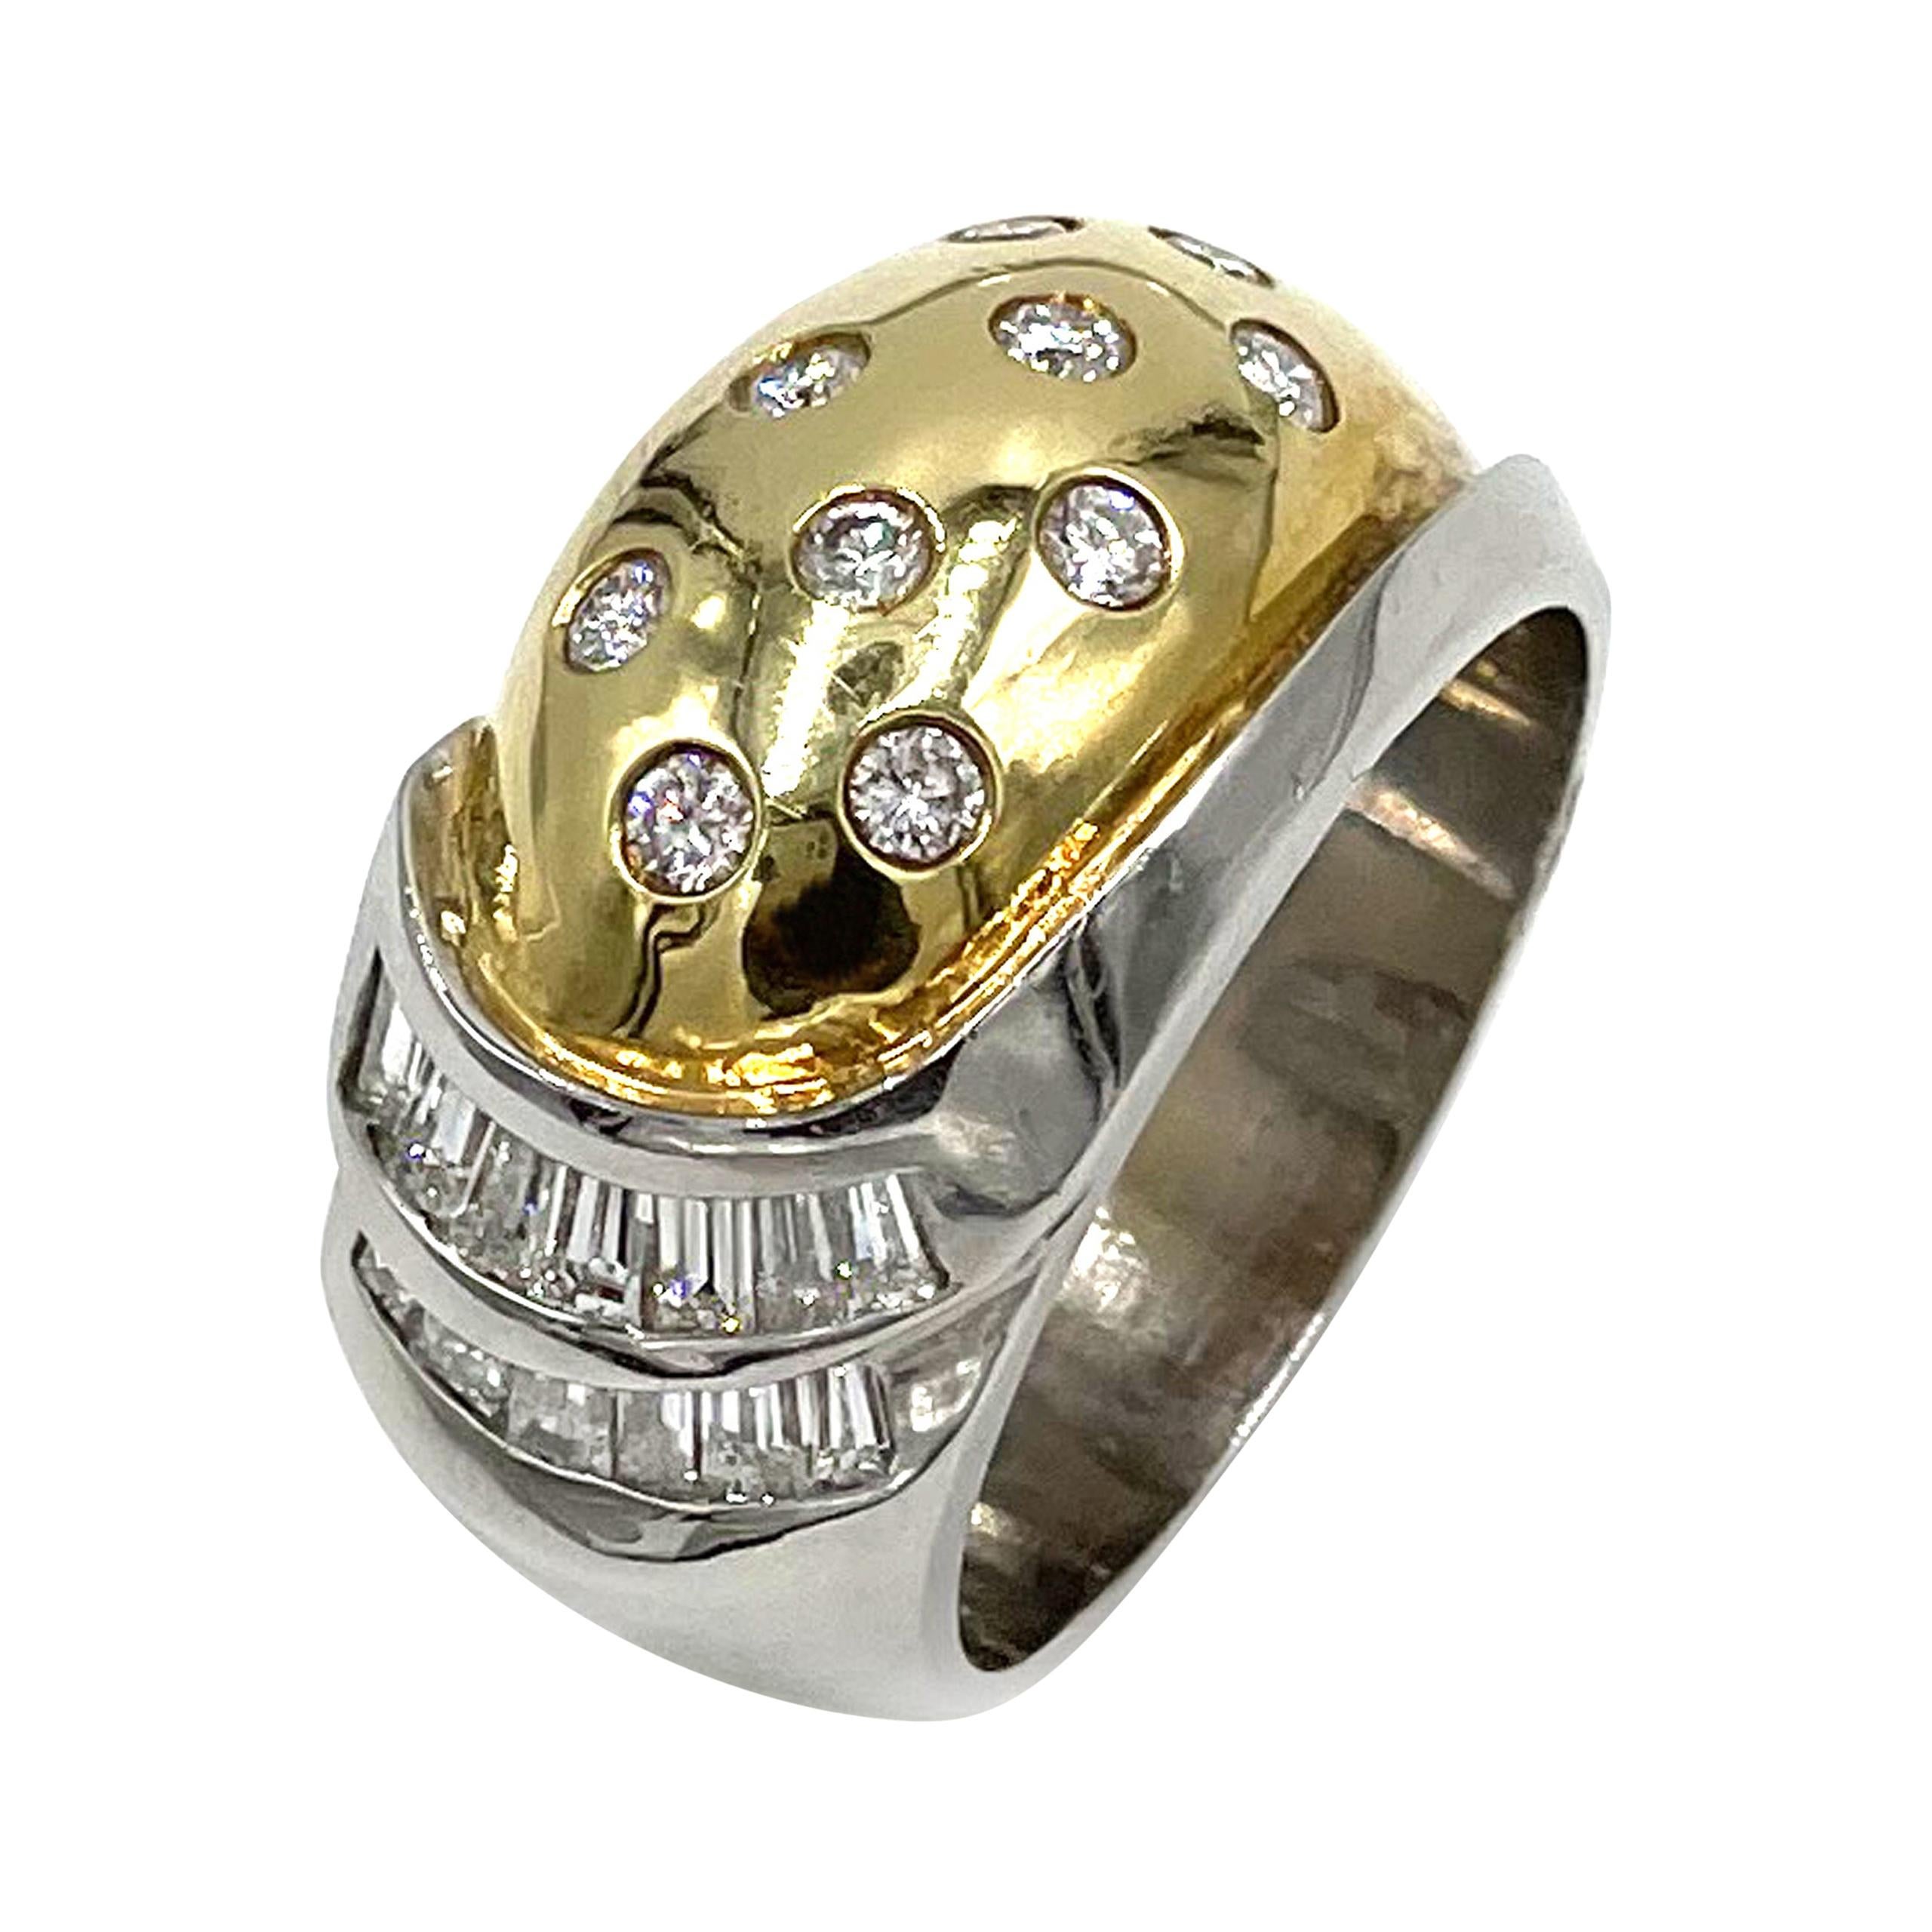 Vintage Platinum and 18k Yellow Gold Dome Ring, Circa 1990